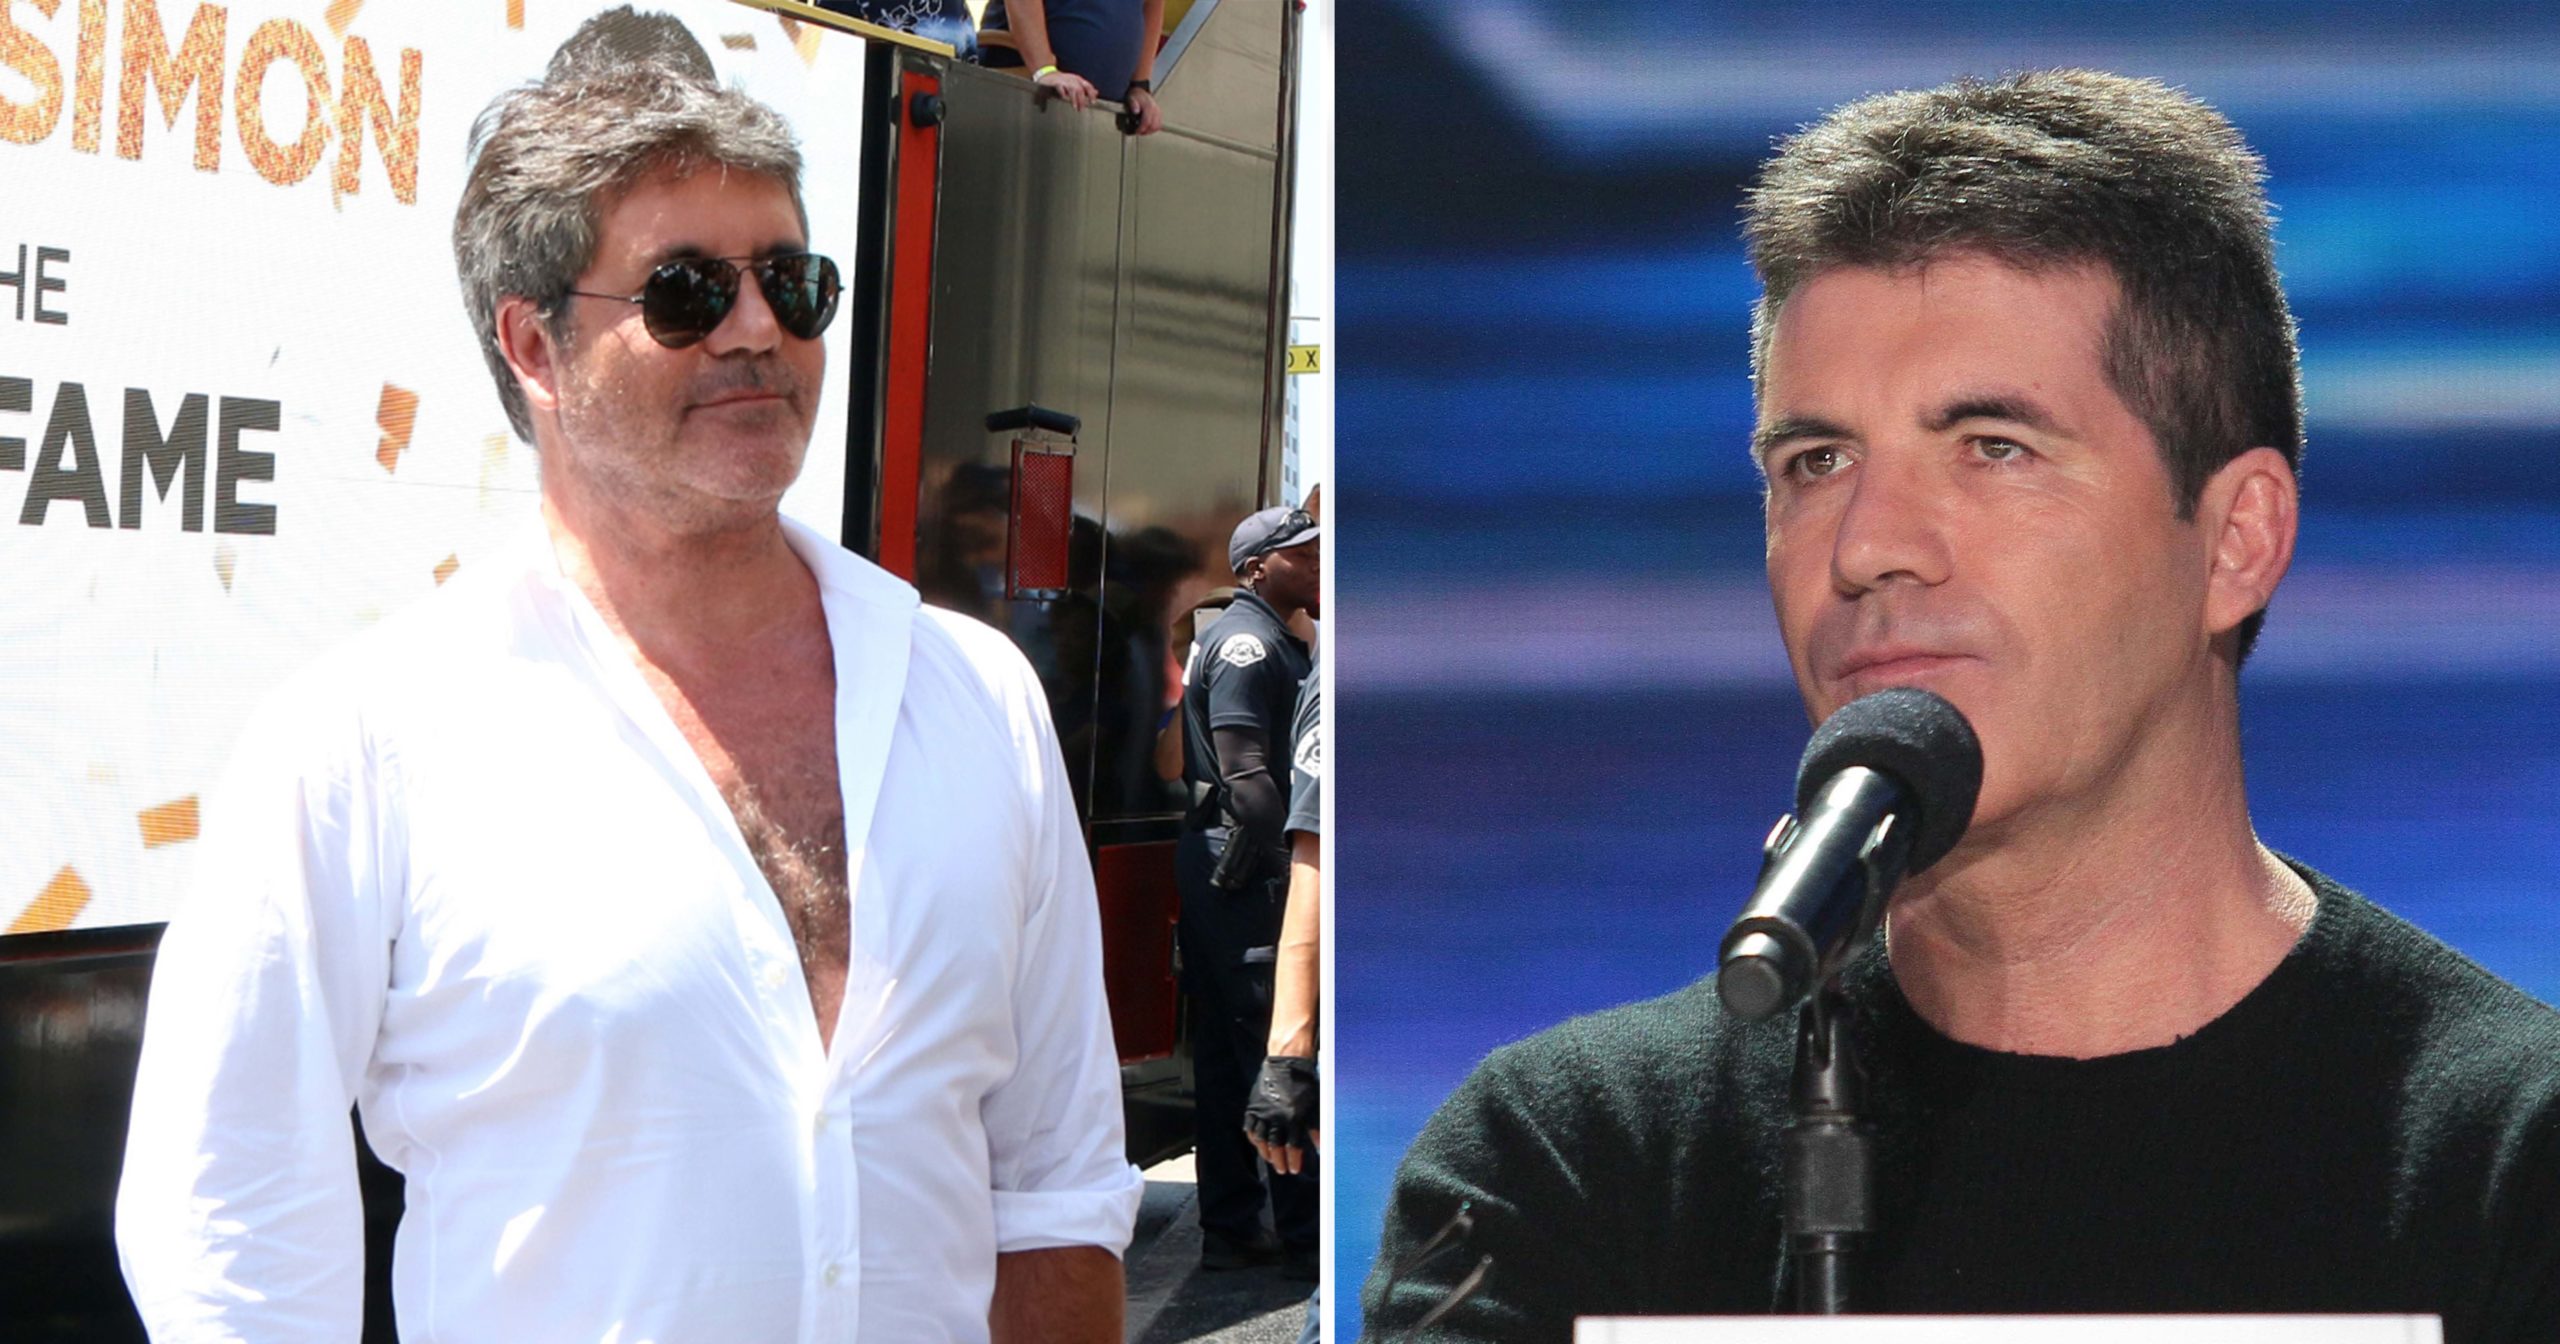 Simon Cowell has now fully recovered from the serious bike accident he had ...